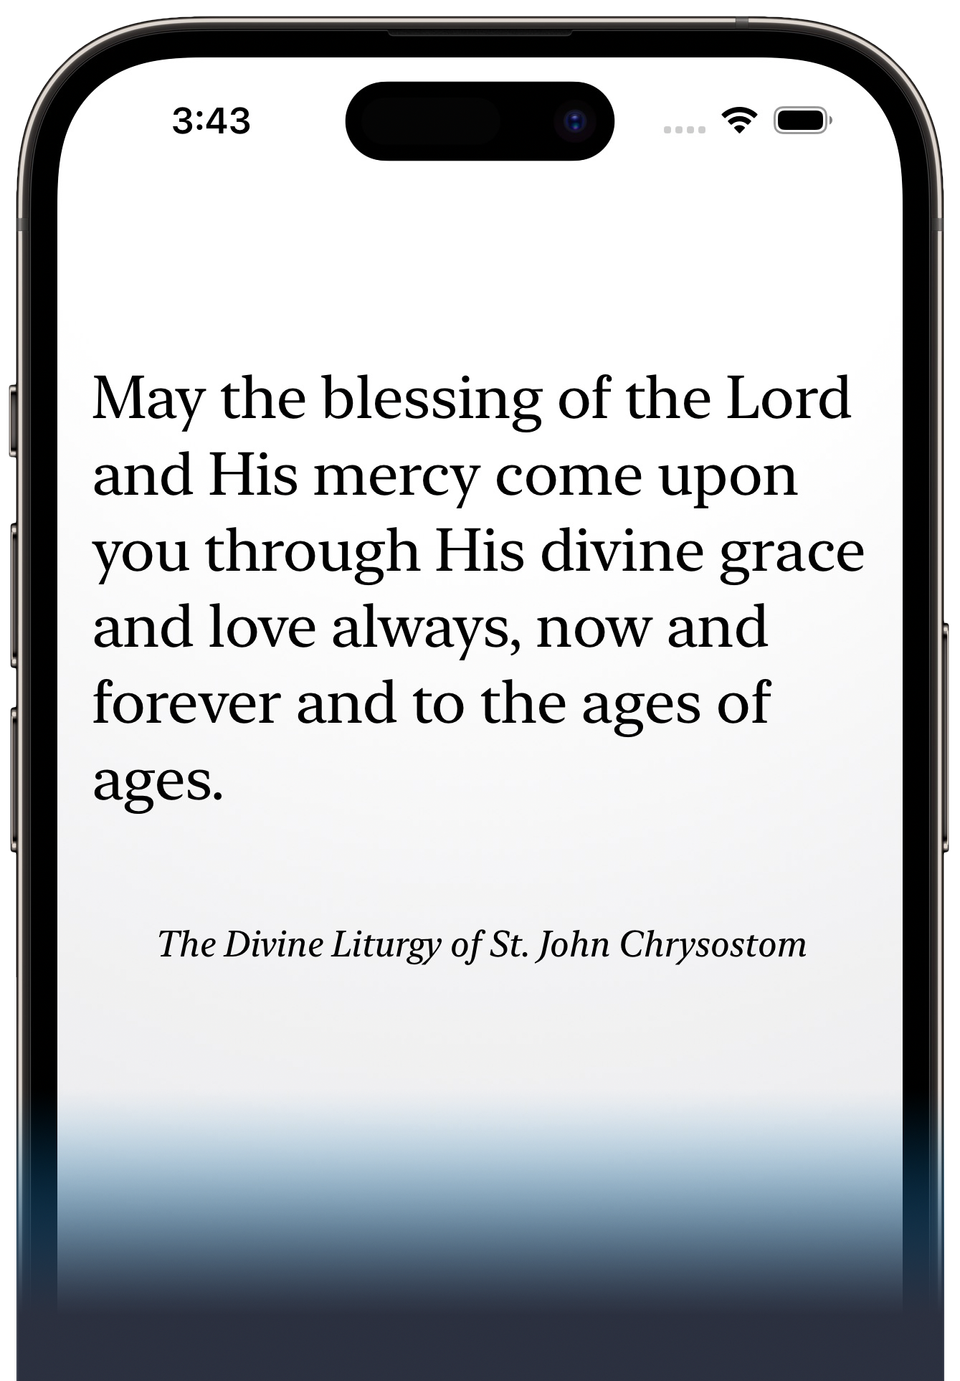 A screenshot of the Benediction App running on an iPhone, with a prayer from The Divine Liturgy of St. John Chrysostom.